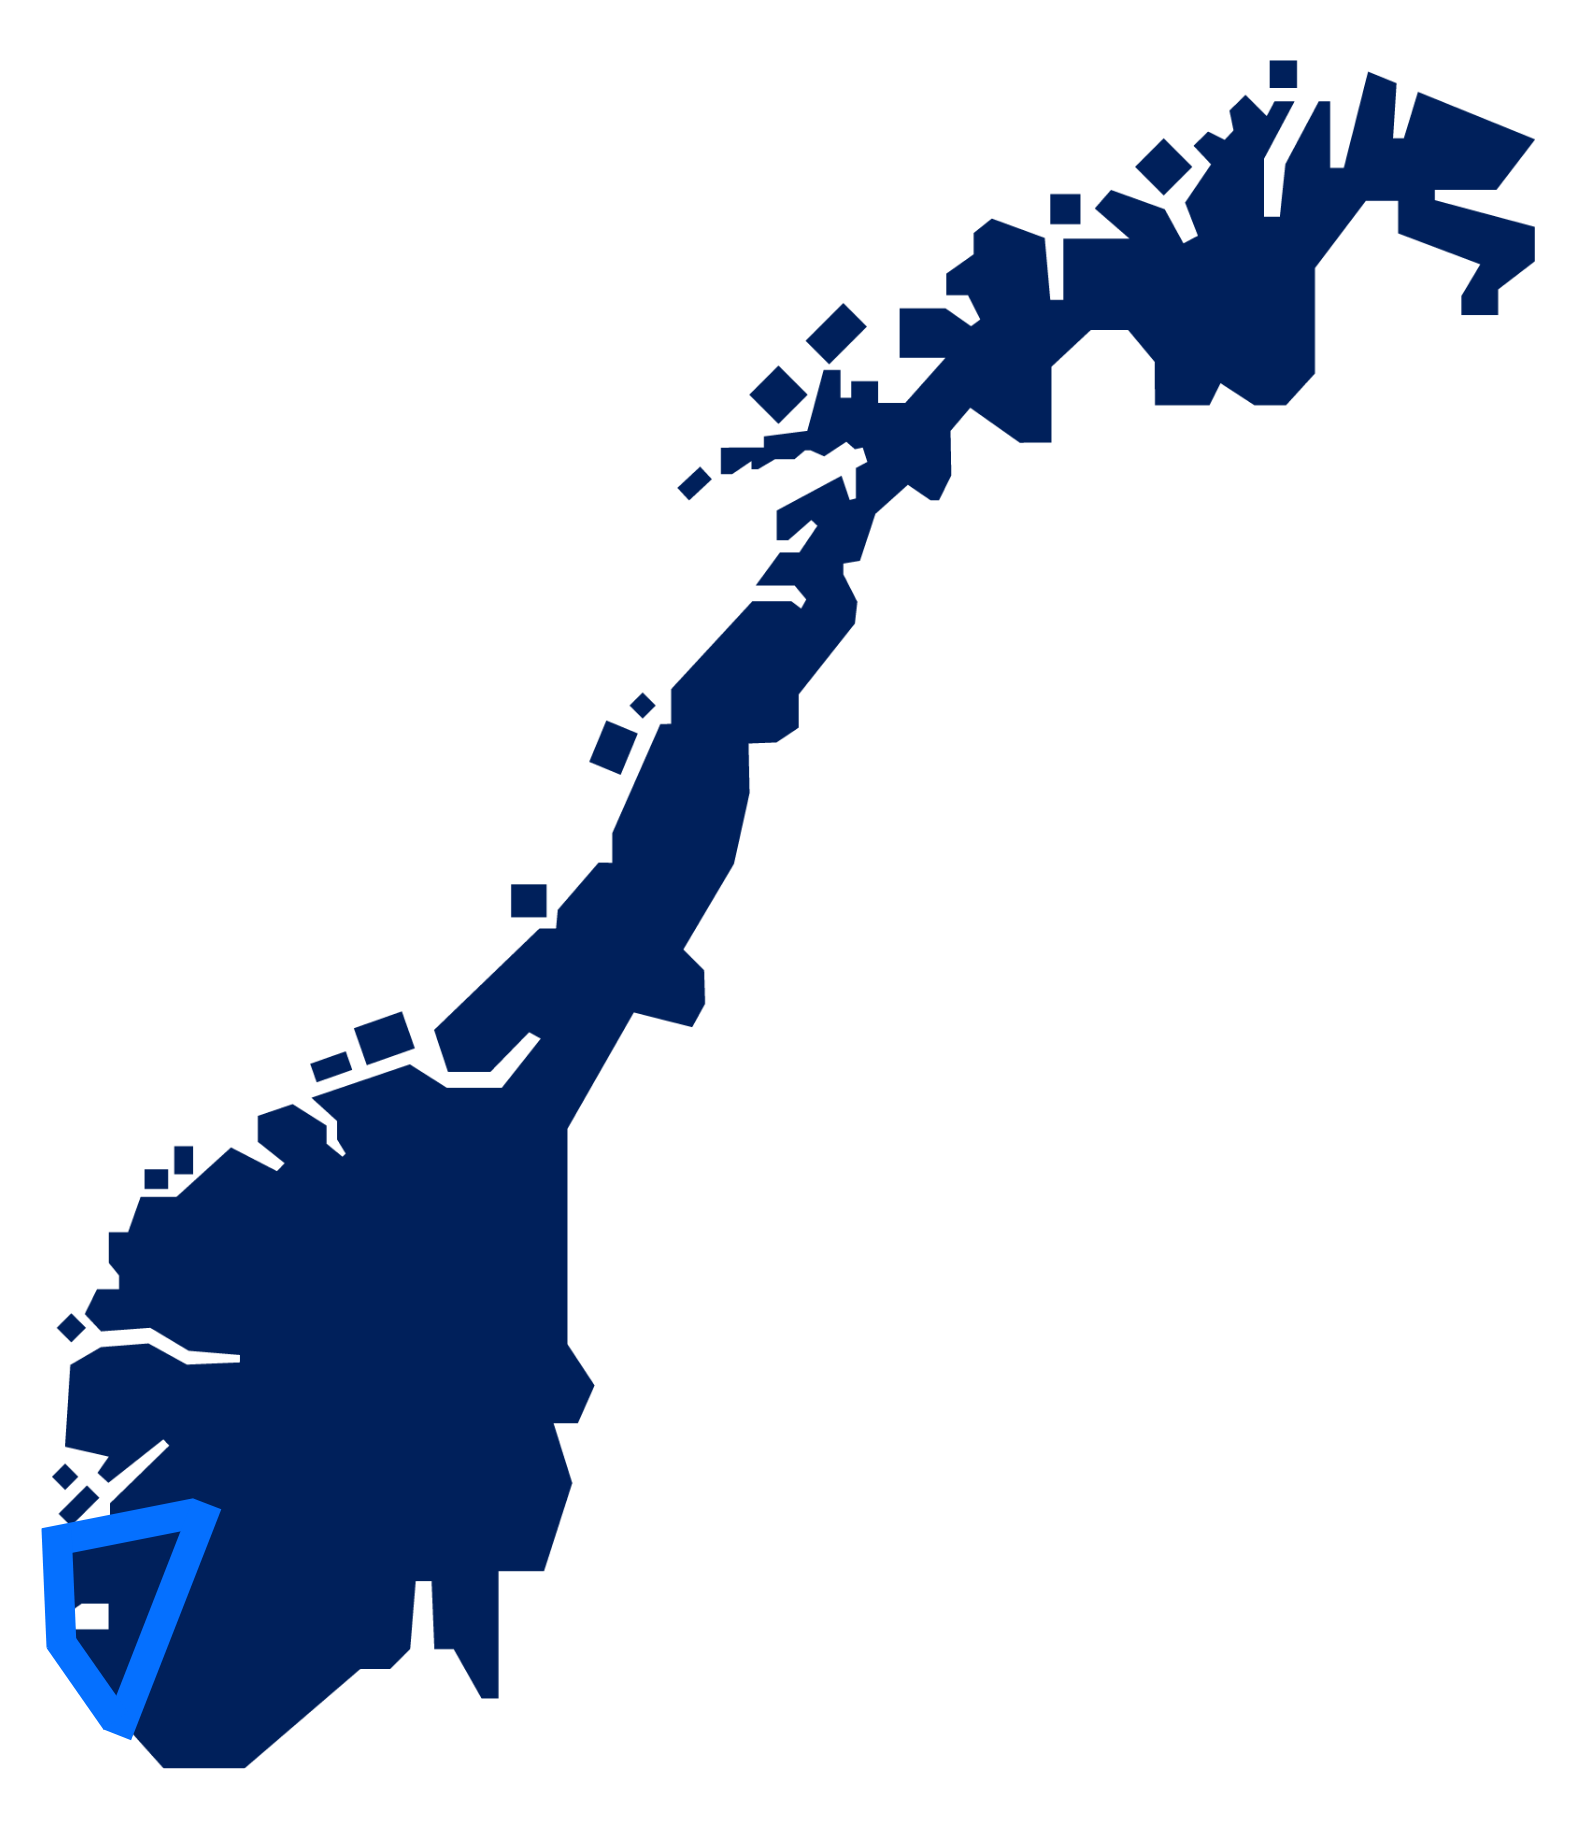 Rogaland Illustration with pinned location for the region